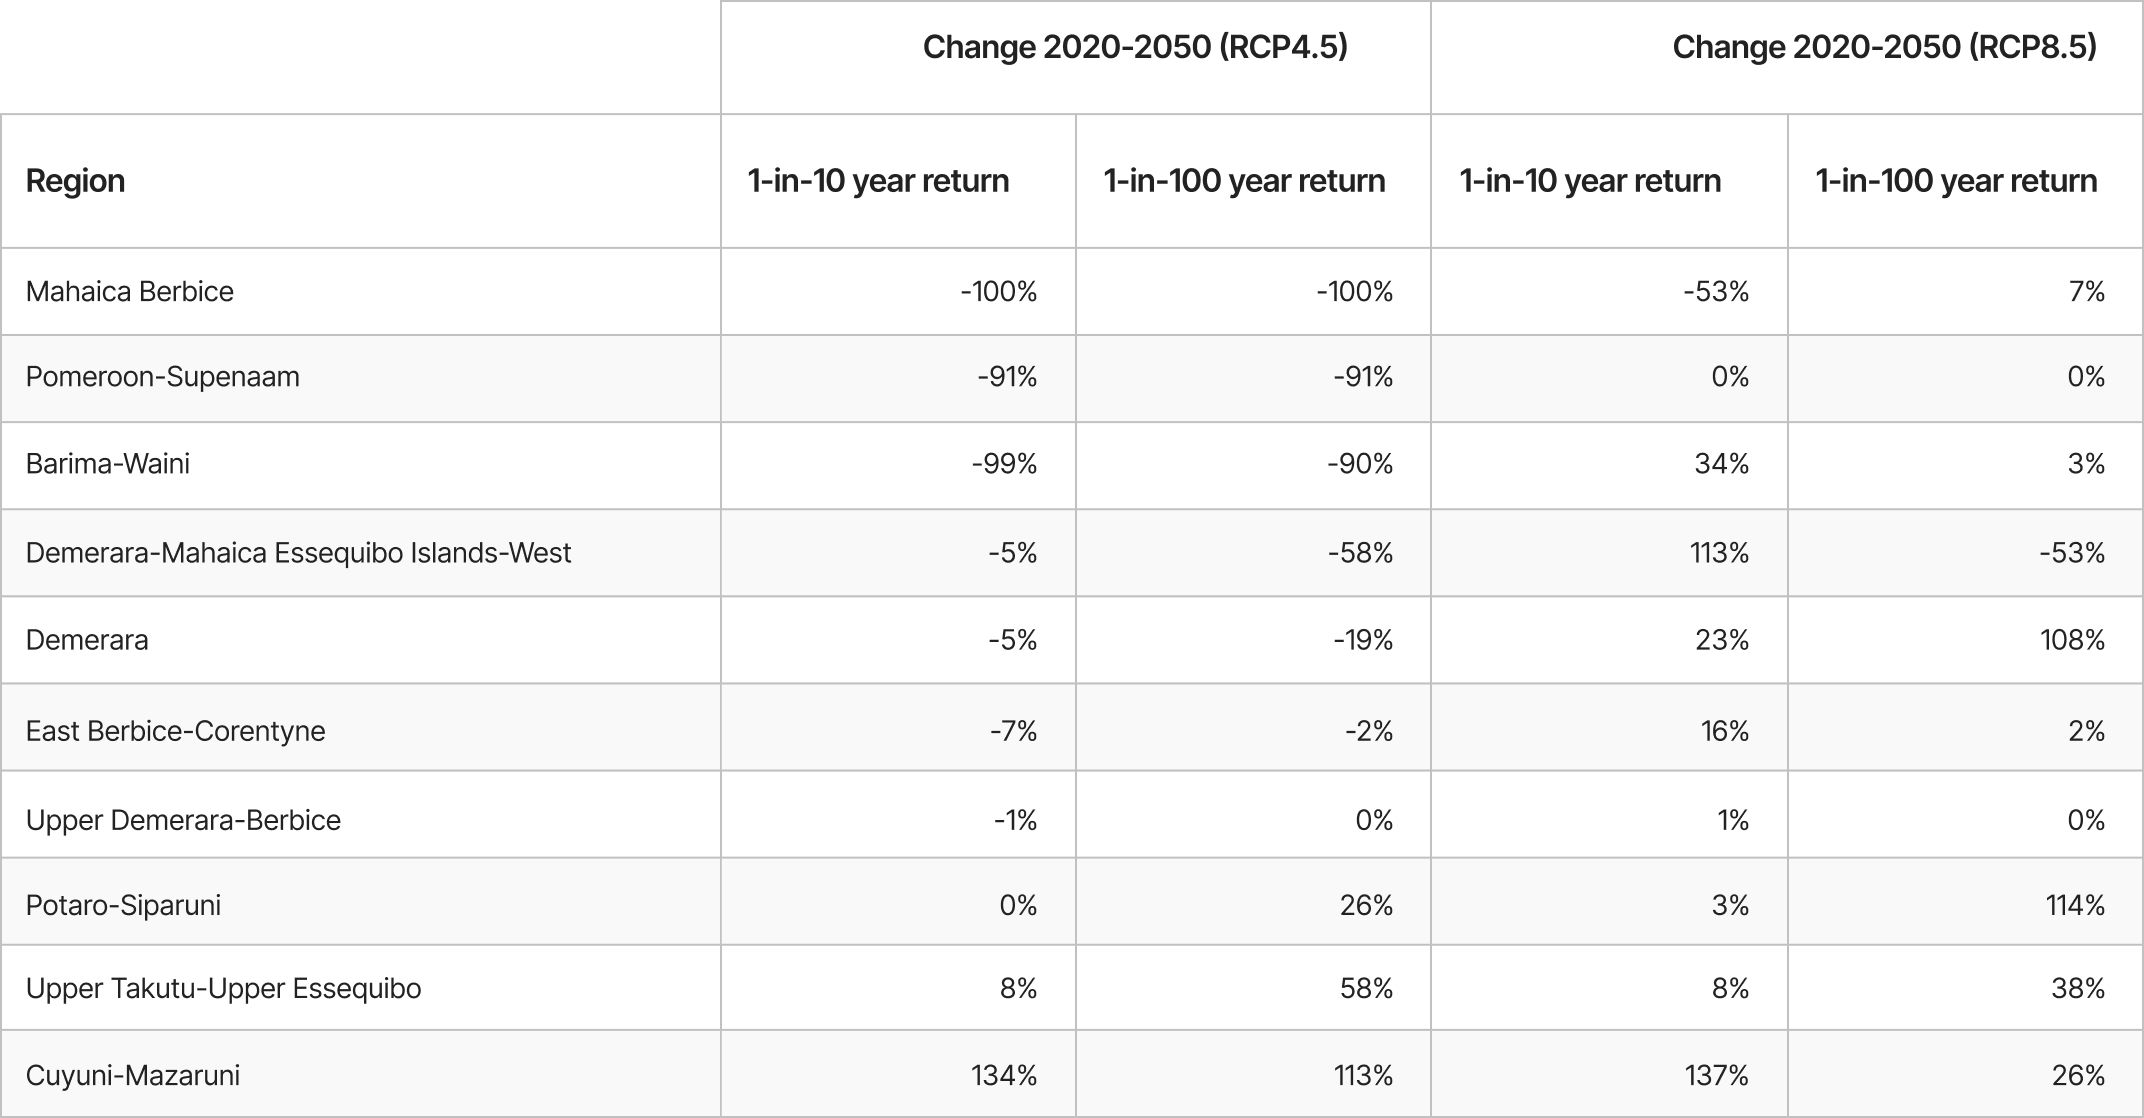 Table displaying projected exposure to floods under two climate scenarios